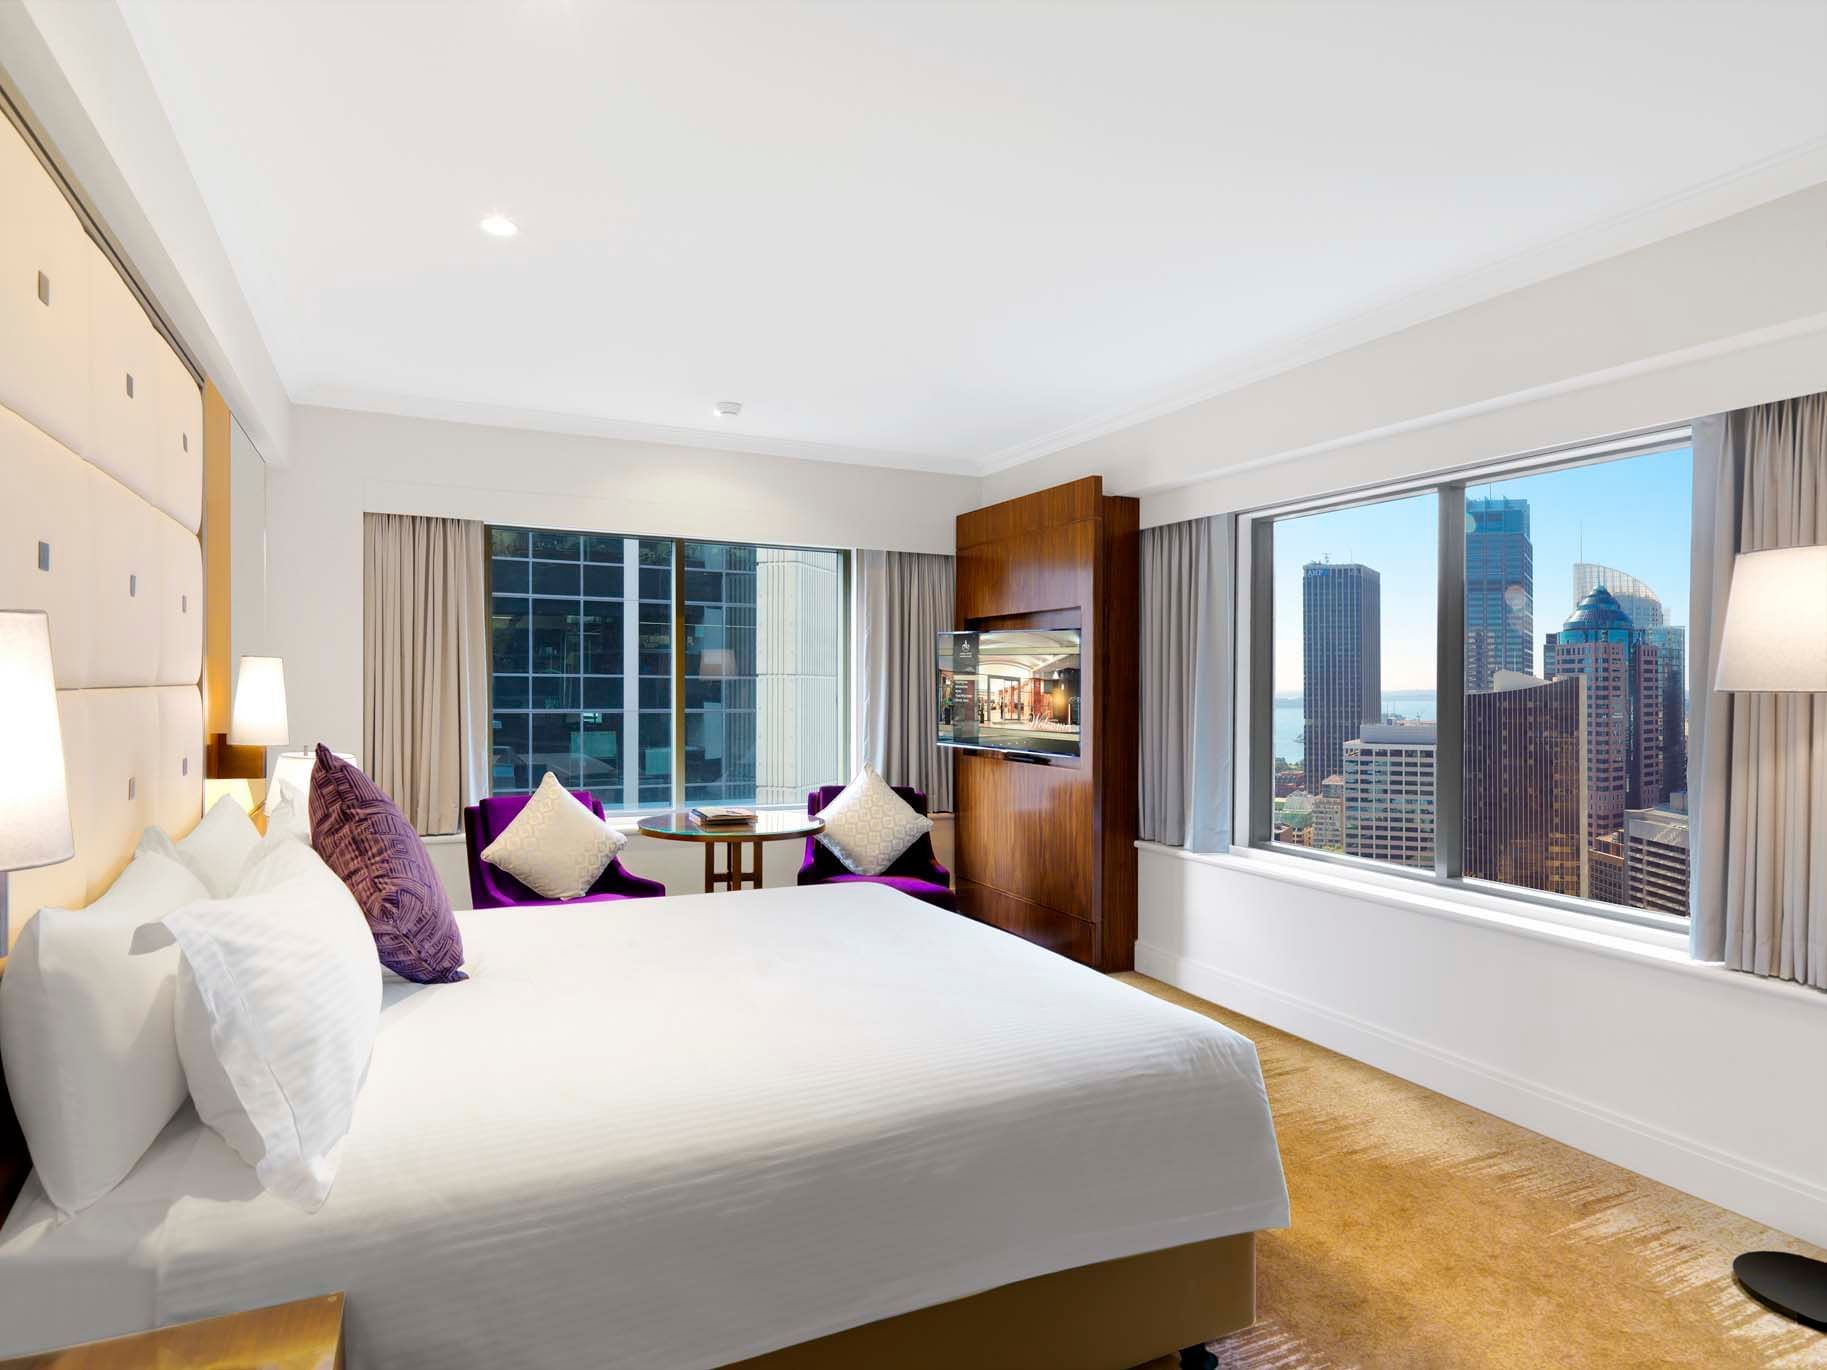 Deluxe Corner King Room with City View at Amora Hotel Sydney